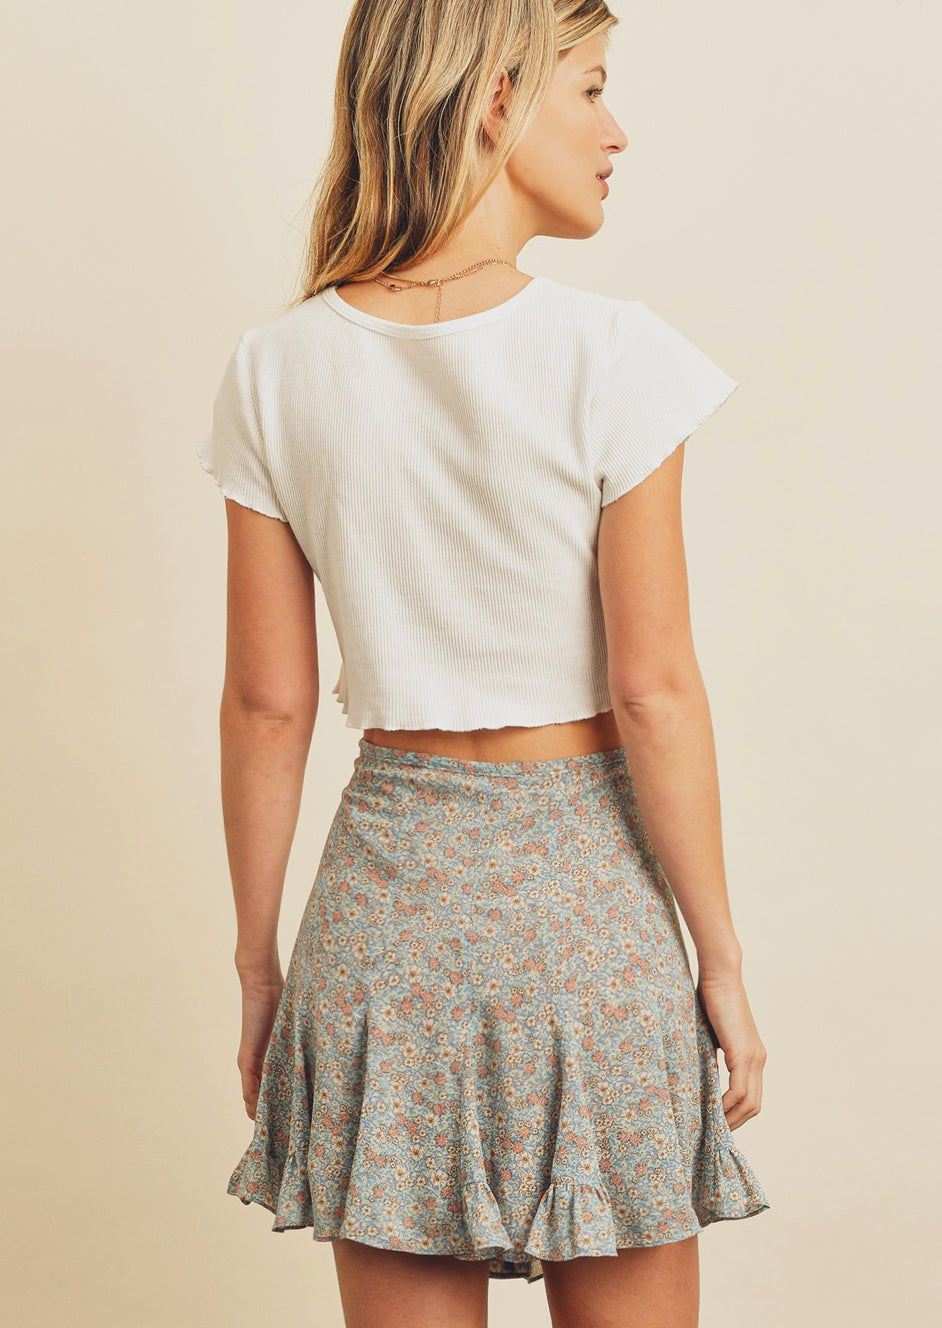 Baby Blue Floral Skirt Shorts